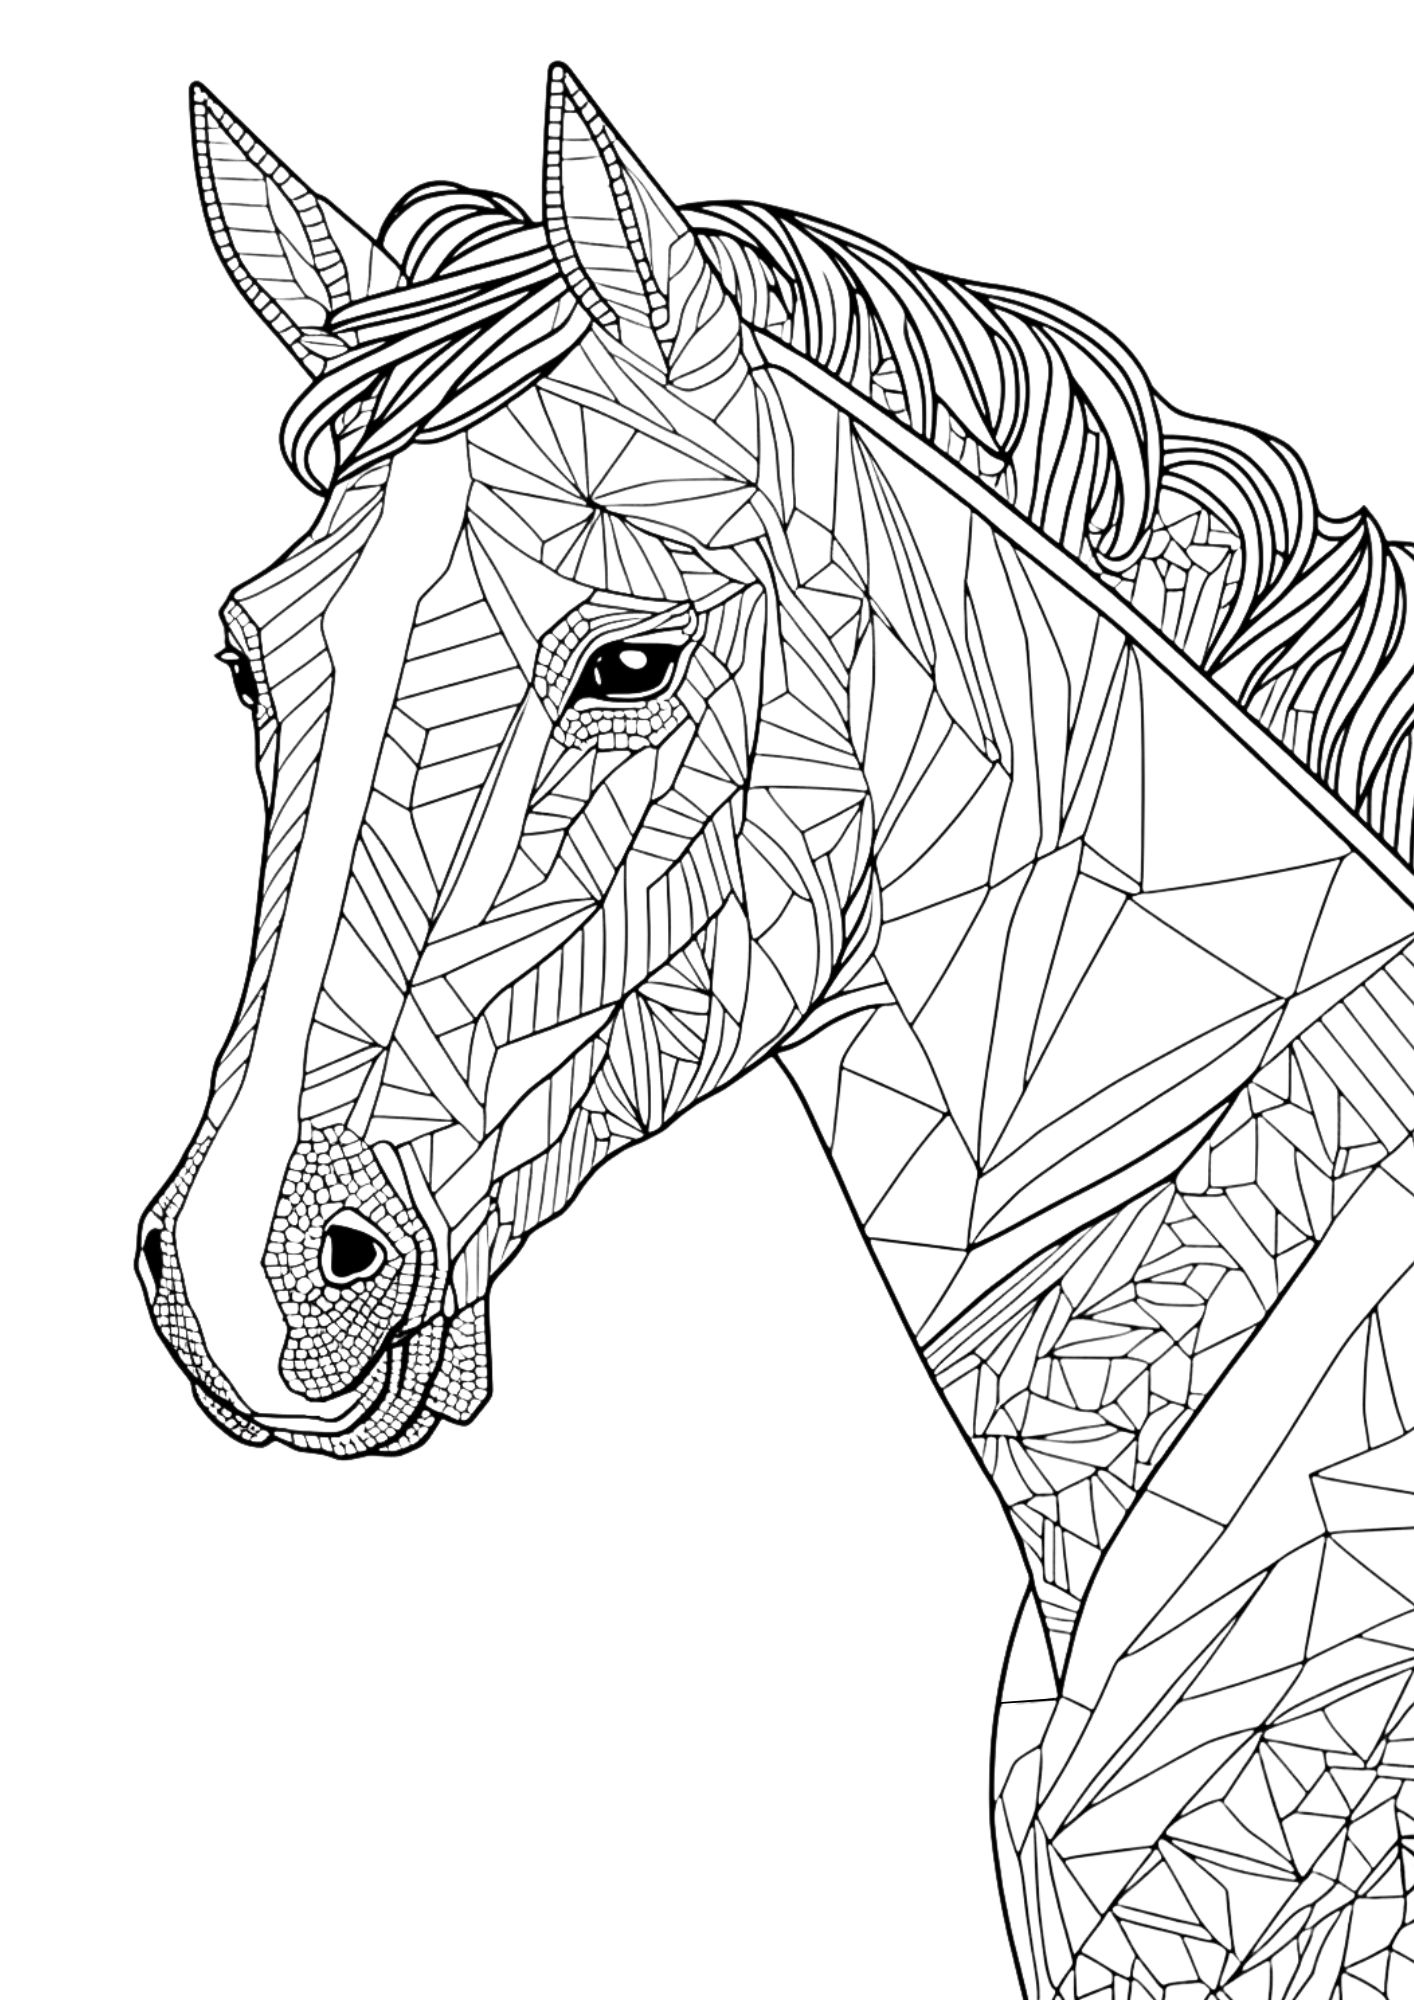 Free printable animal coloring pages for adults relax unwind and color